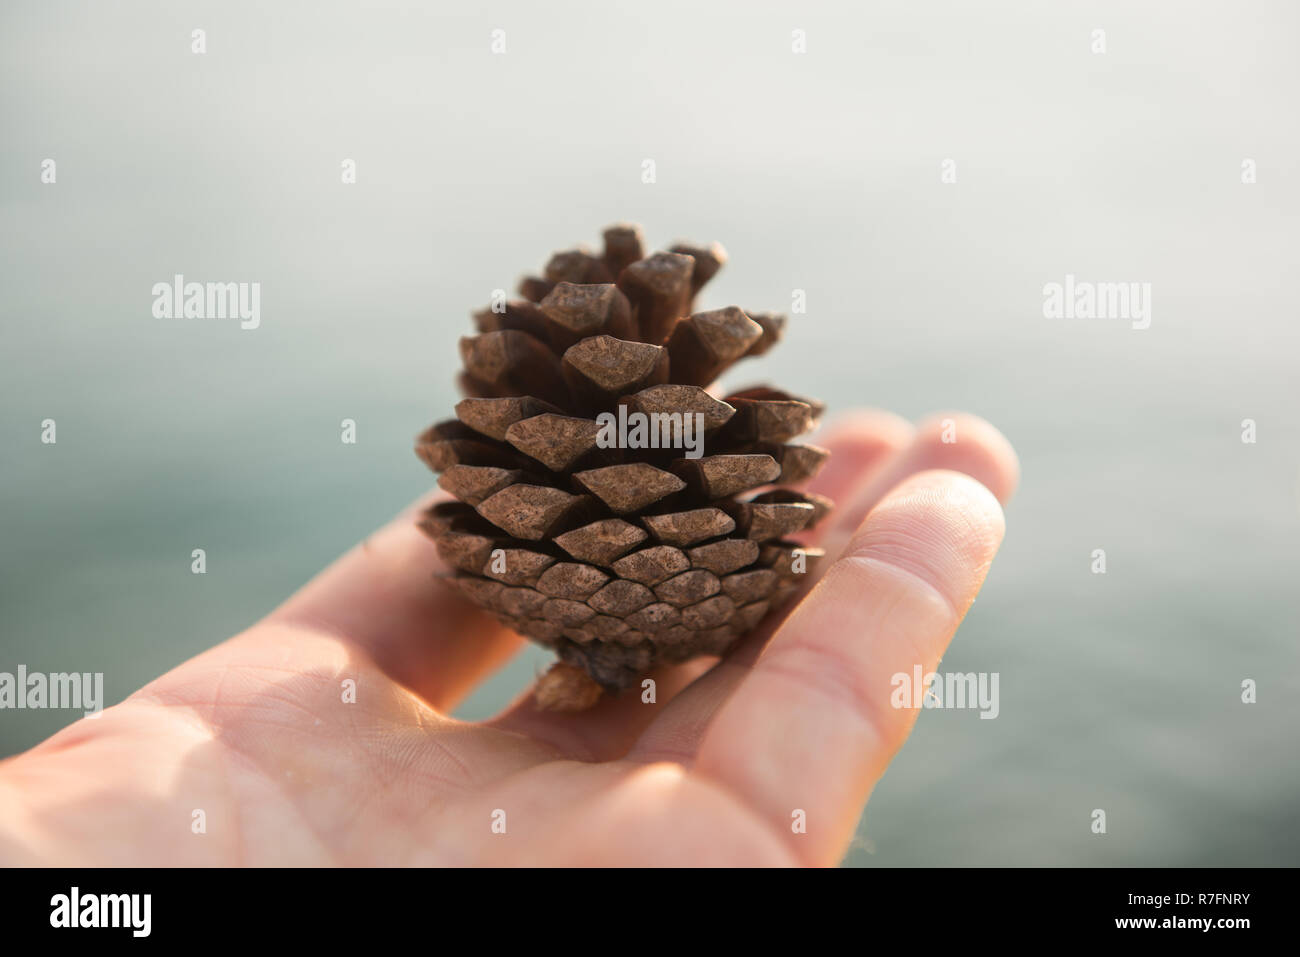 Small brown pine cone in a human hand Stock Photo